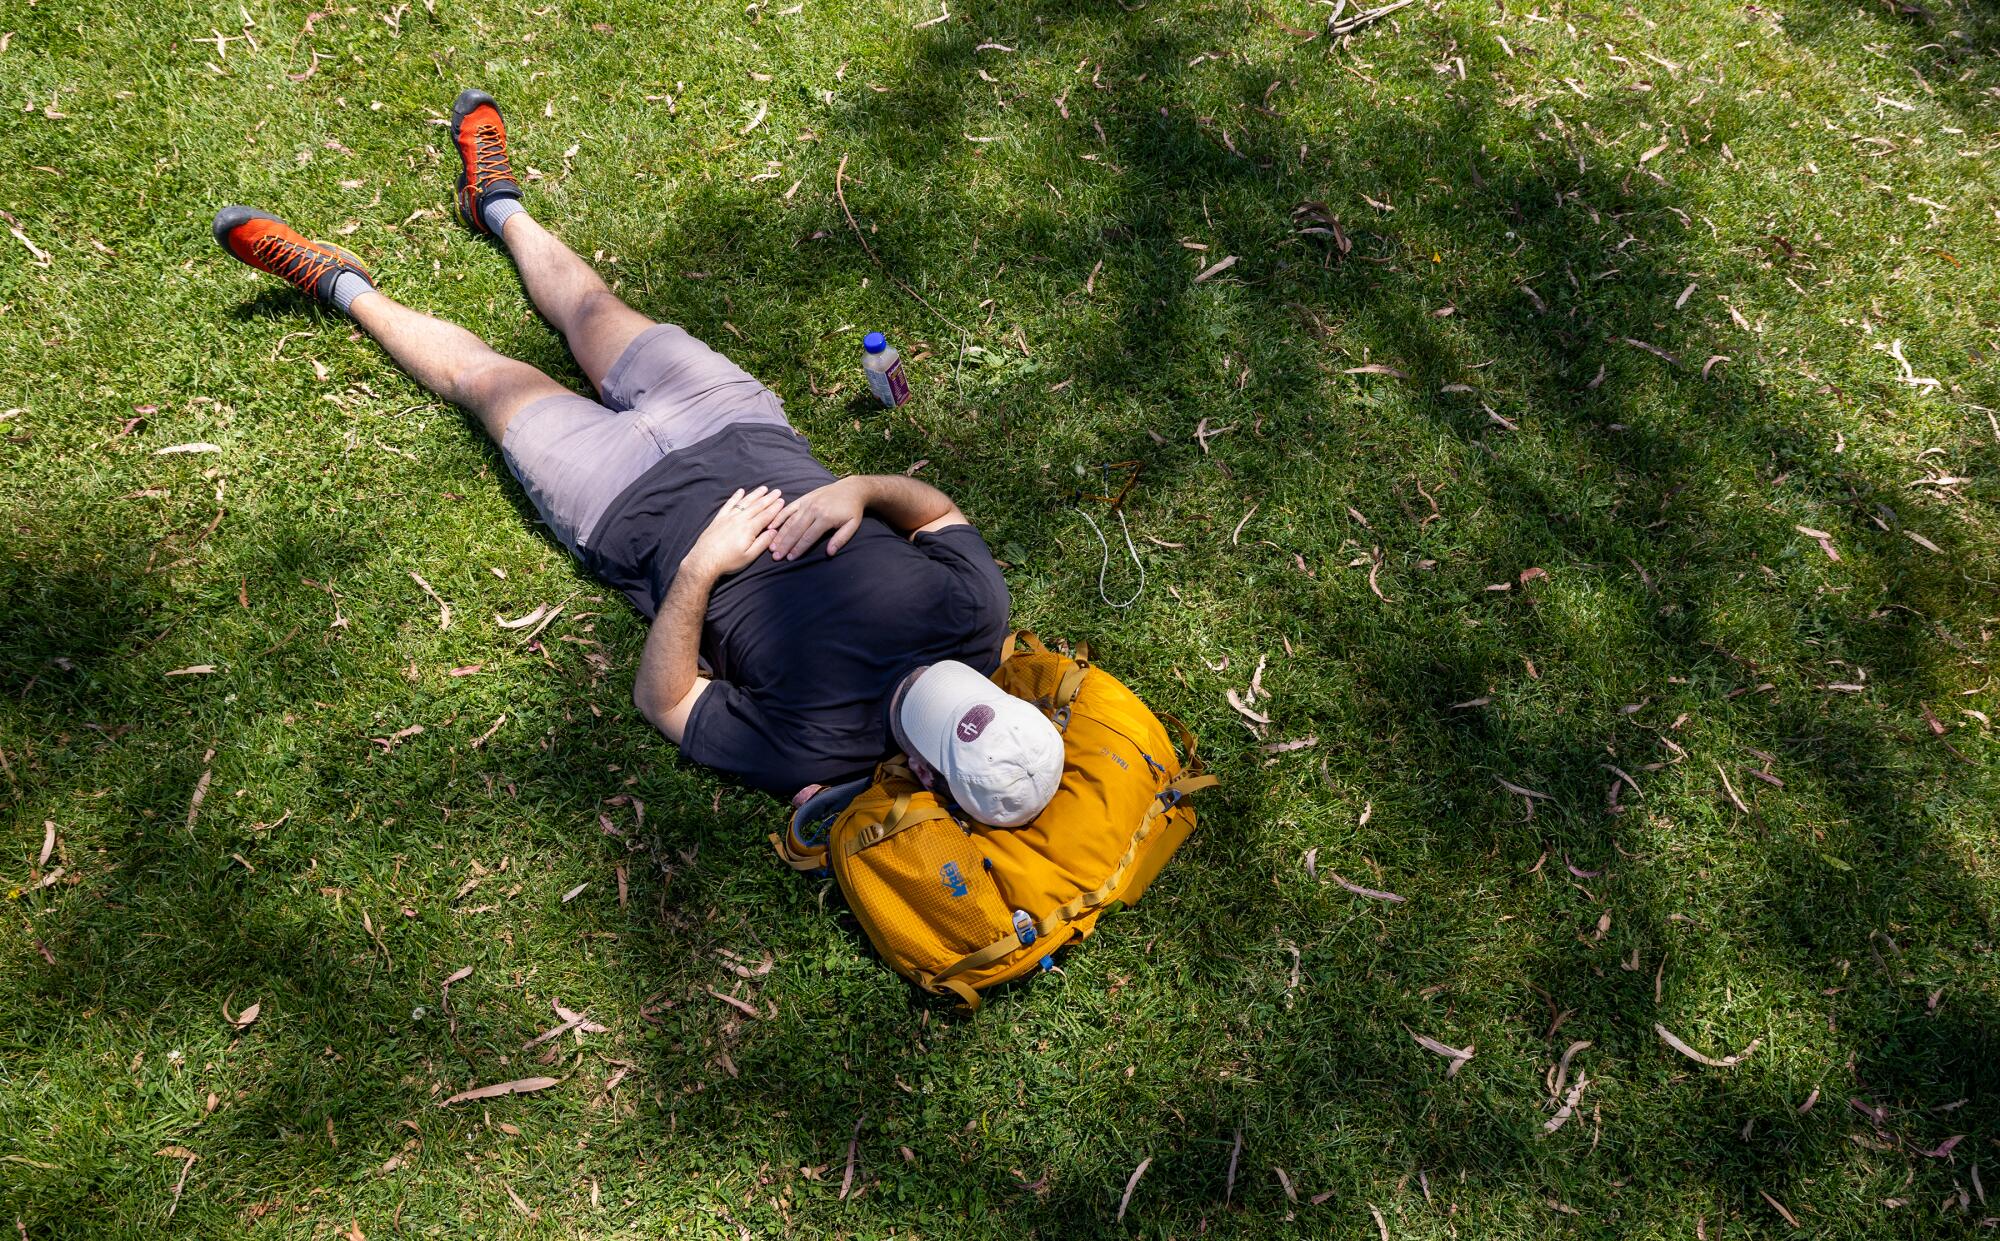 A man lies on the grass, using his yellow backpack as a pillow.